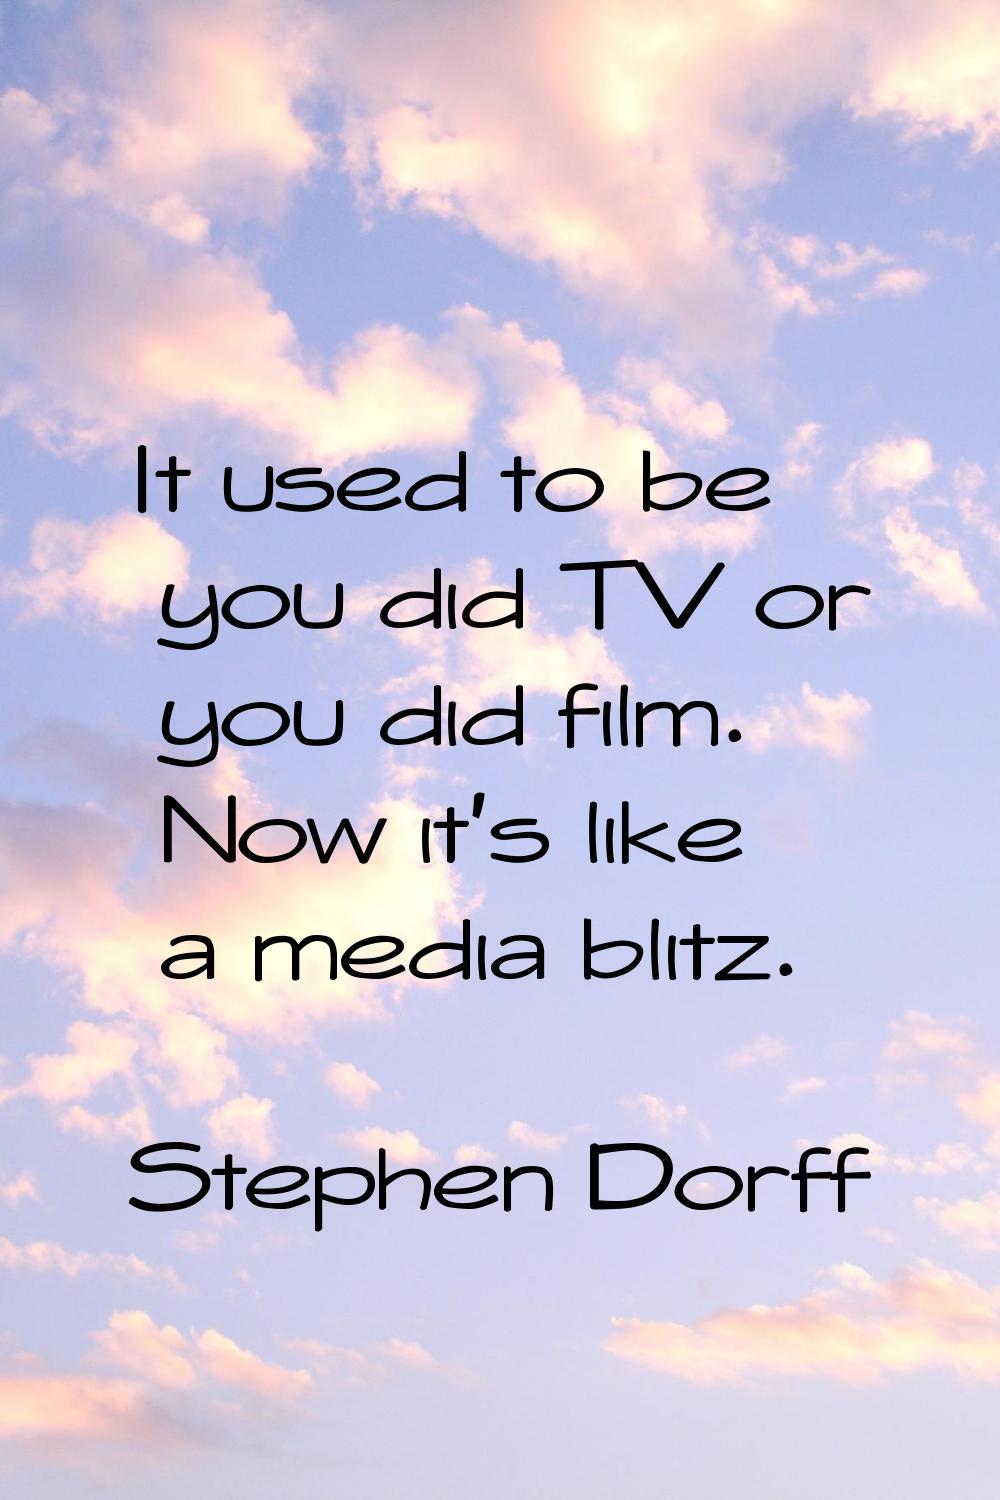 It used to be you did TV or you did film. Now it's like a media blitz.